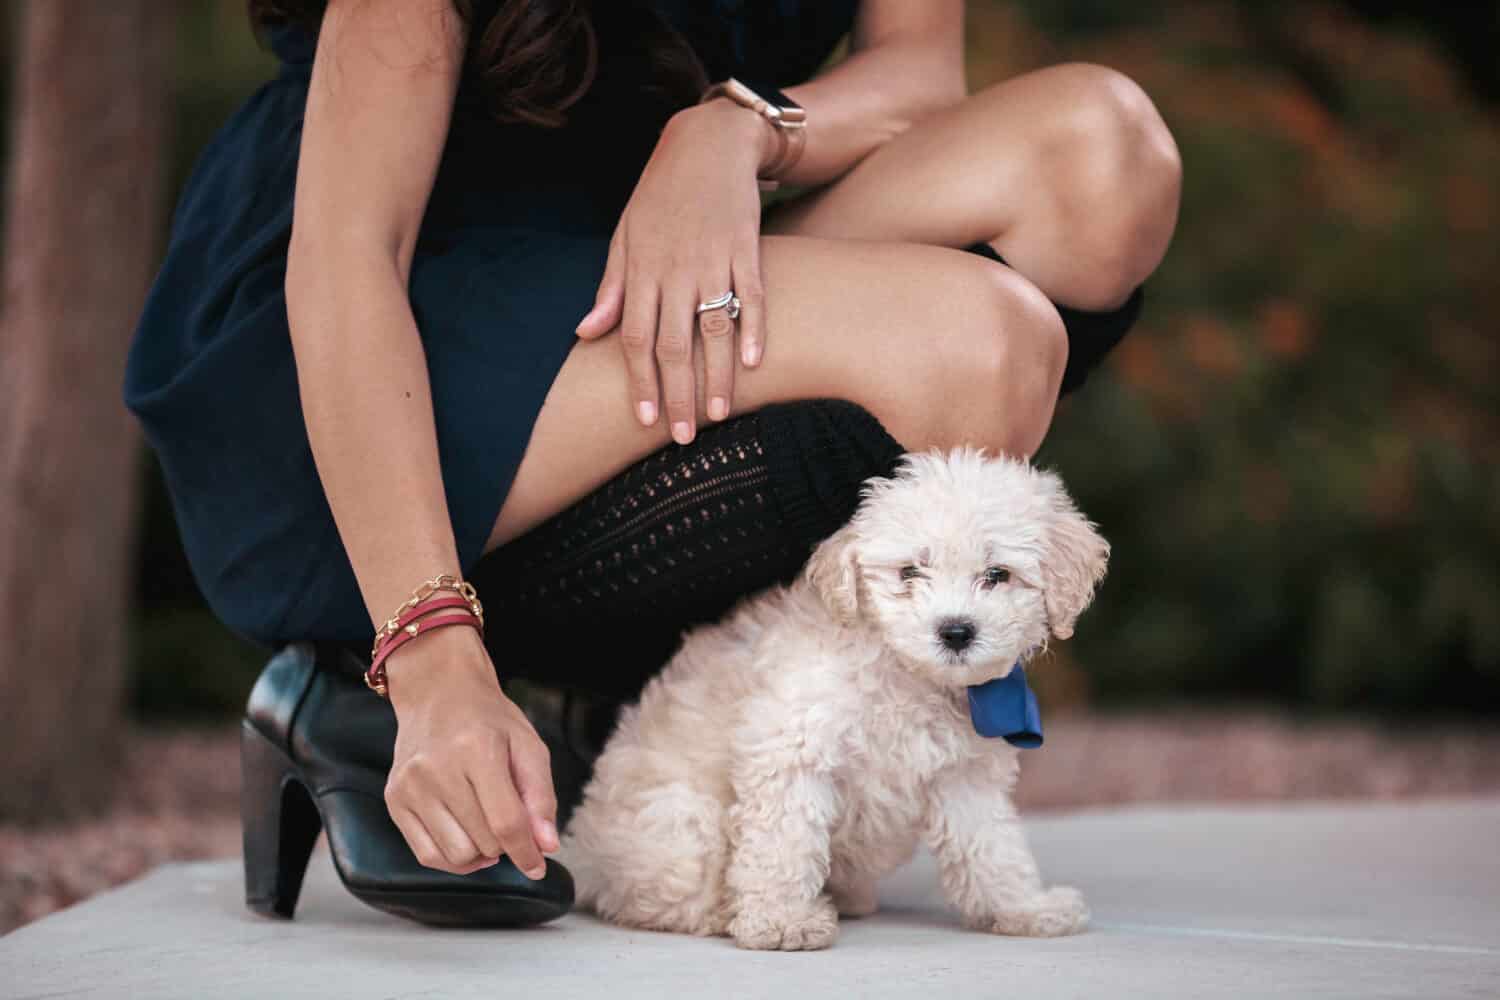 beautiful asian filipina girl wearing a dress and boots kneeling down next to a cute cream colored maltipoo puppy with a blue bow on her 